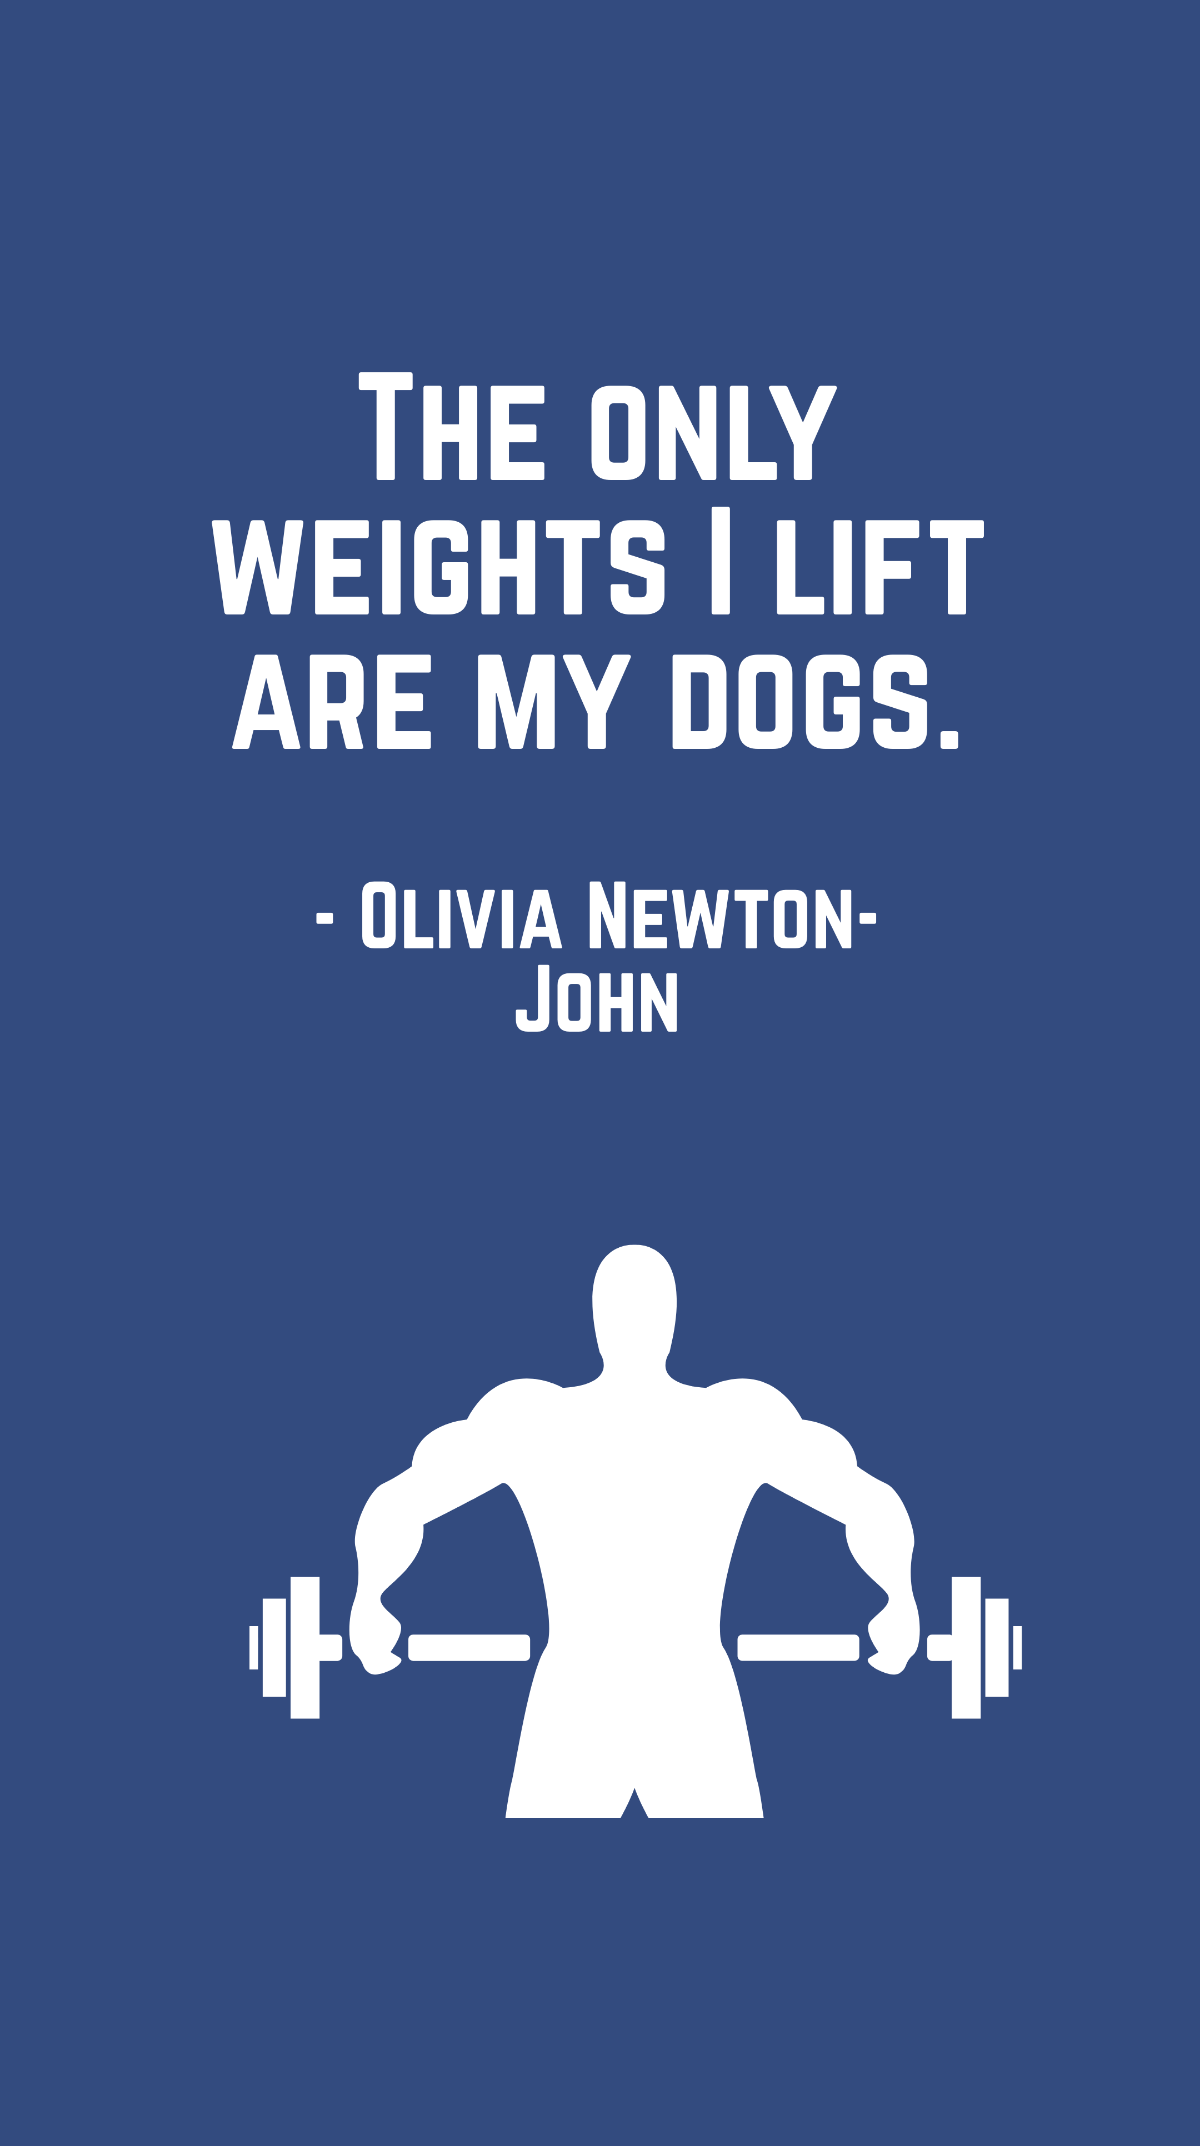 Olivia Newton-John - The only weights I lift are my dogs. Template